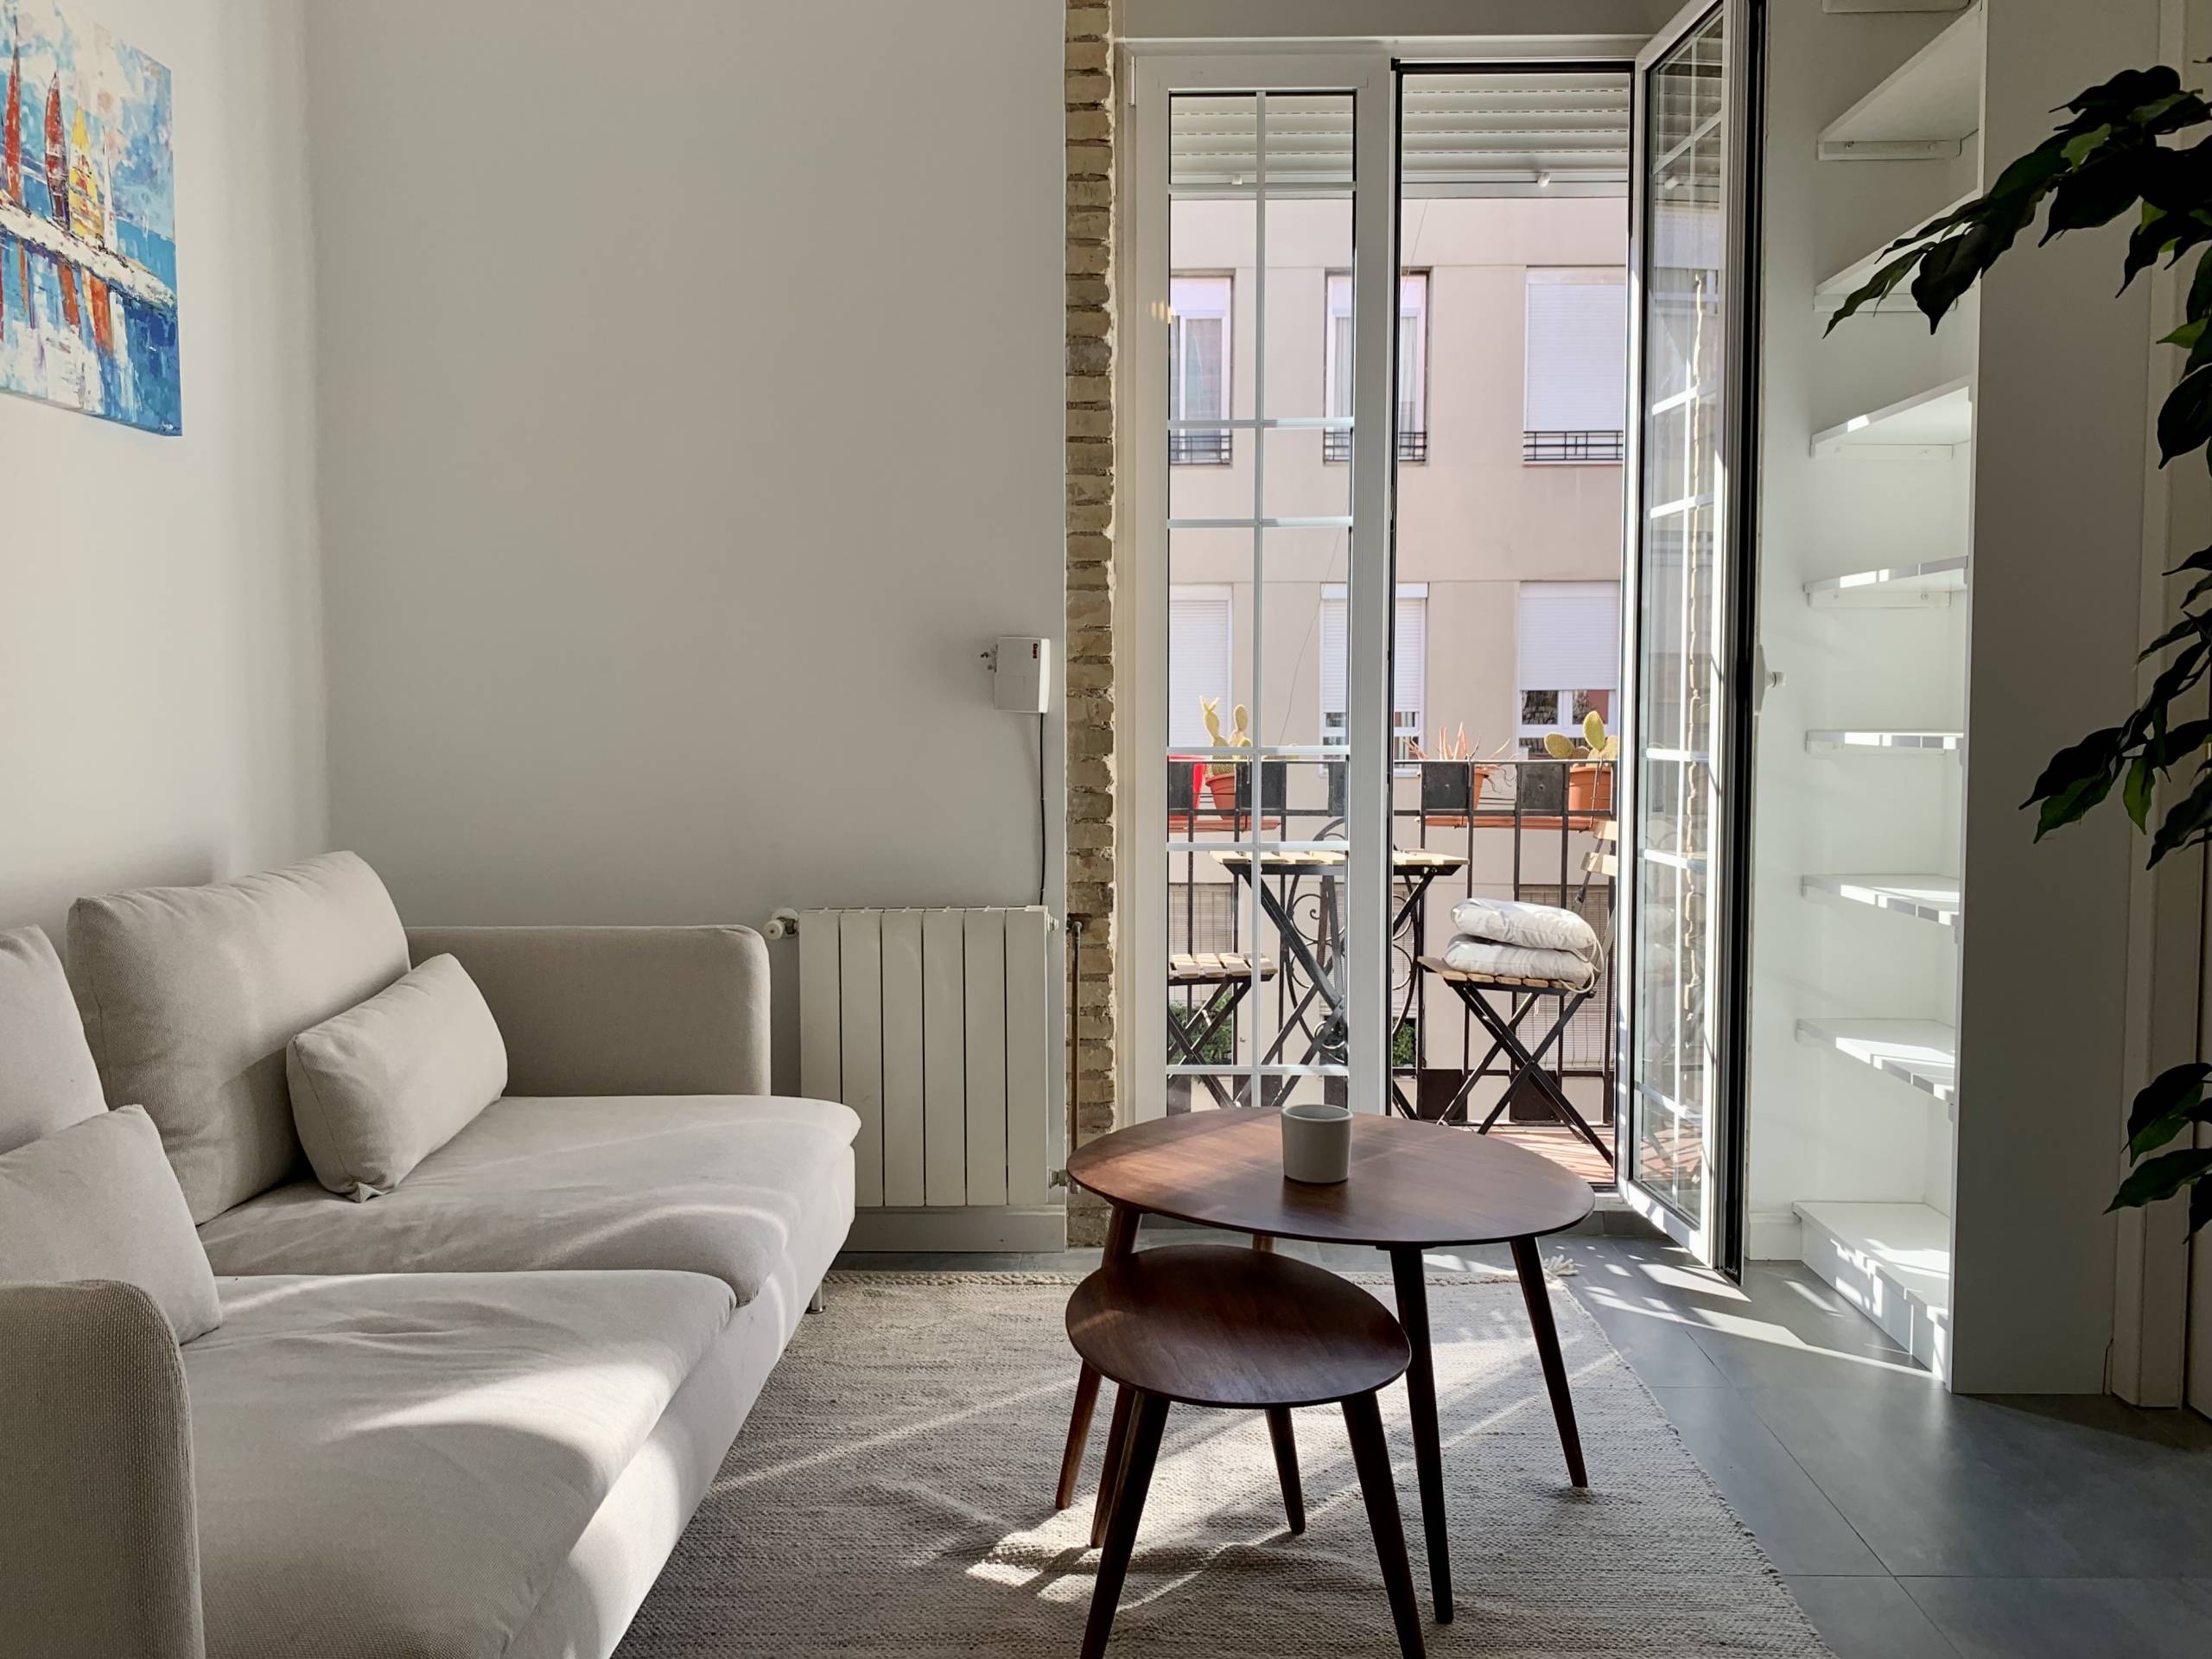 Doña Maria - Beautiful apartment for rent in Valencia